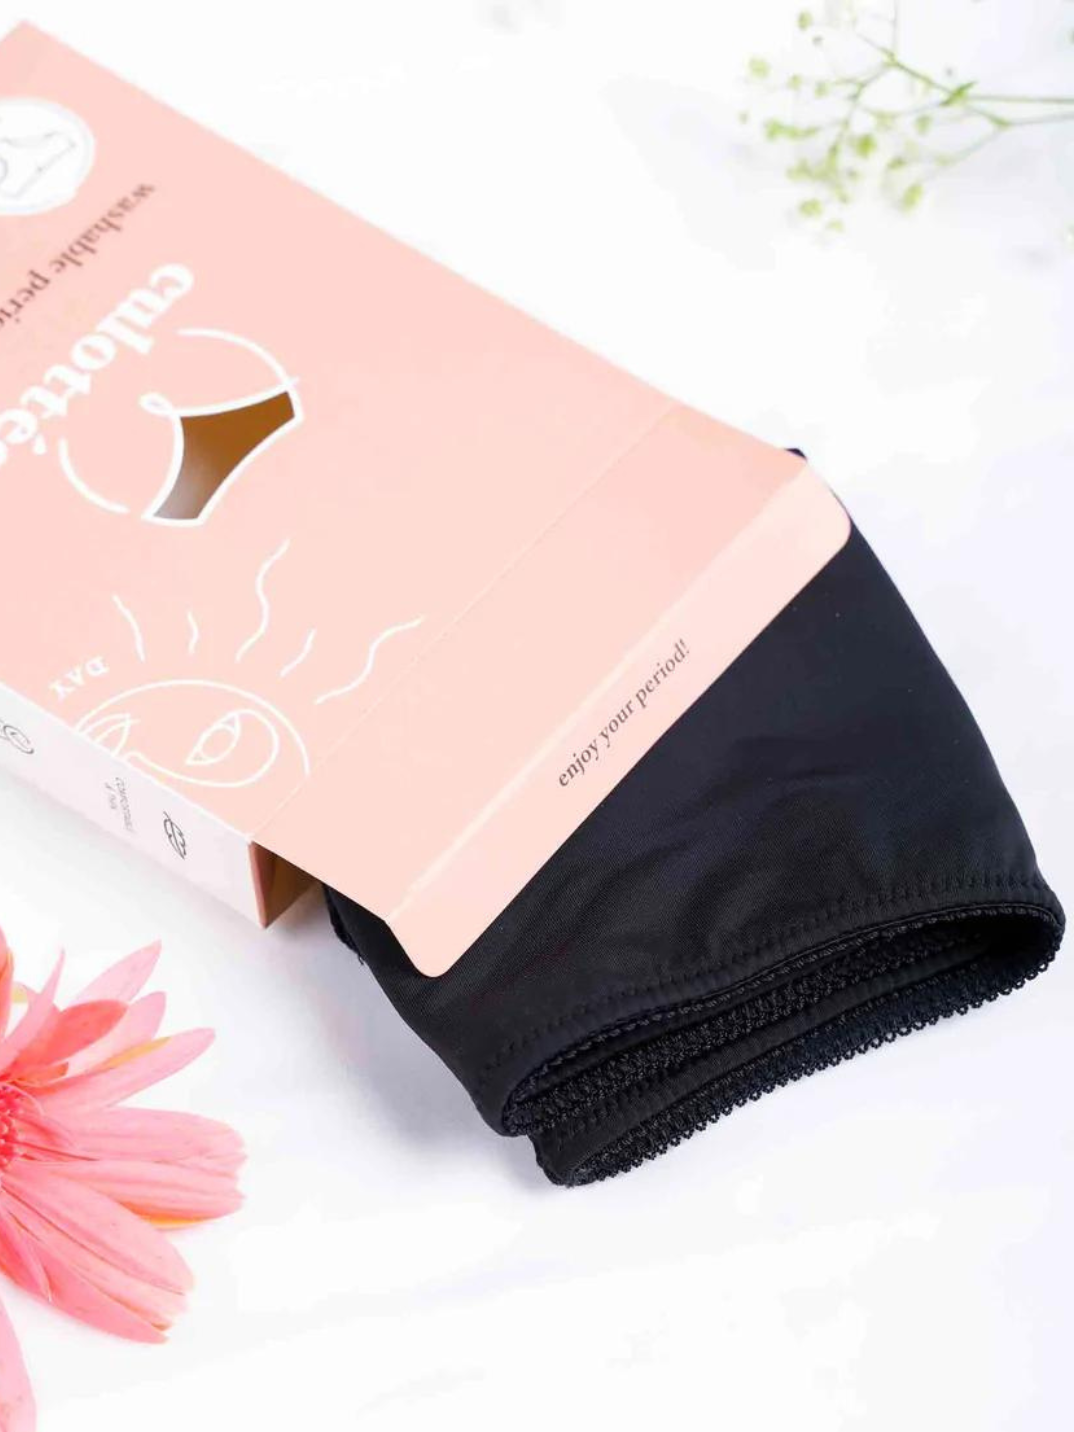 Sunny Shorty shop sustainable zero waste ethically-made period underwear reusable washable women-owned brand